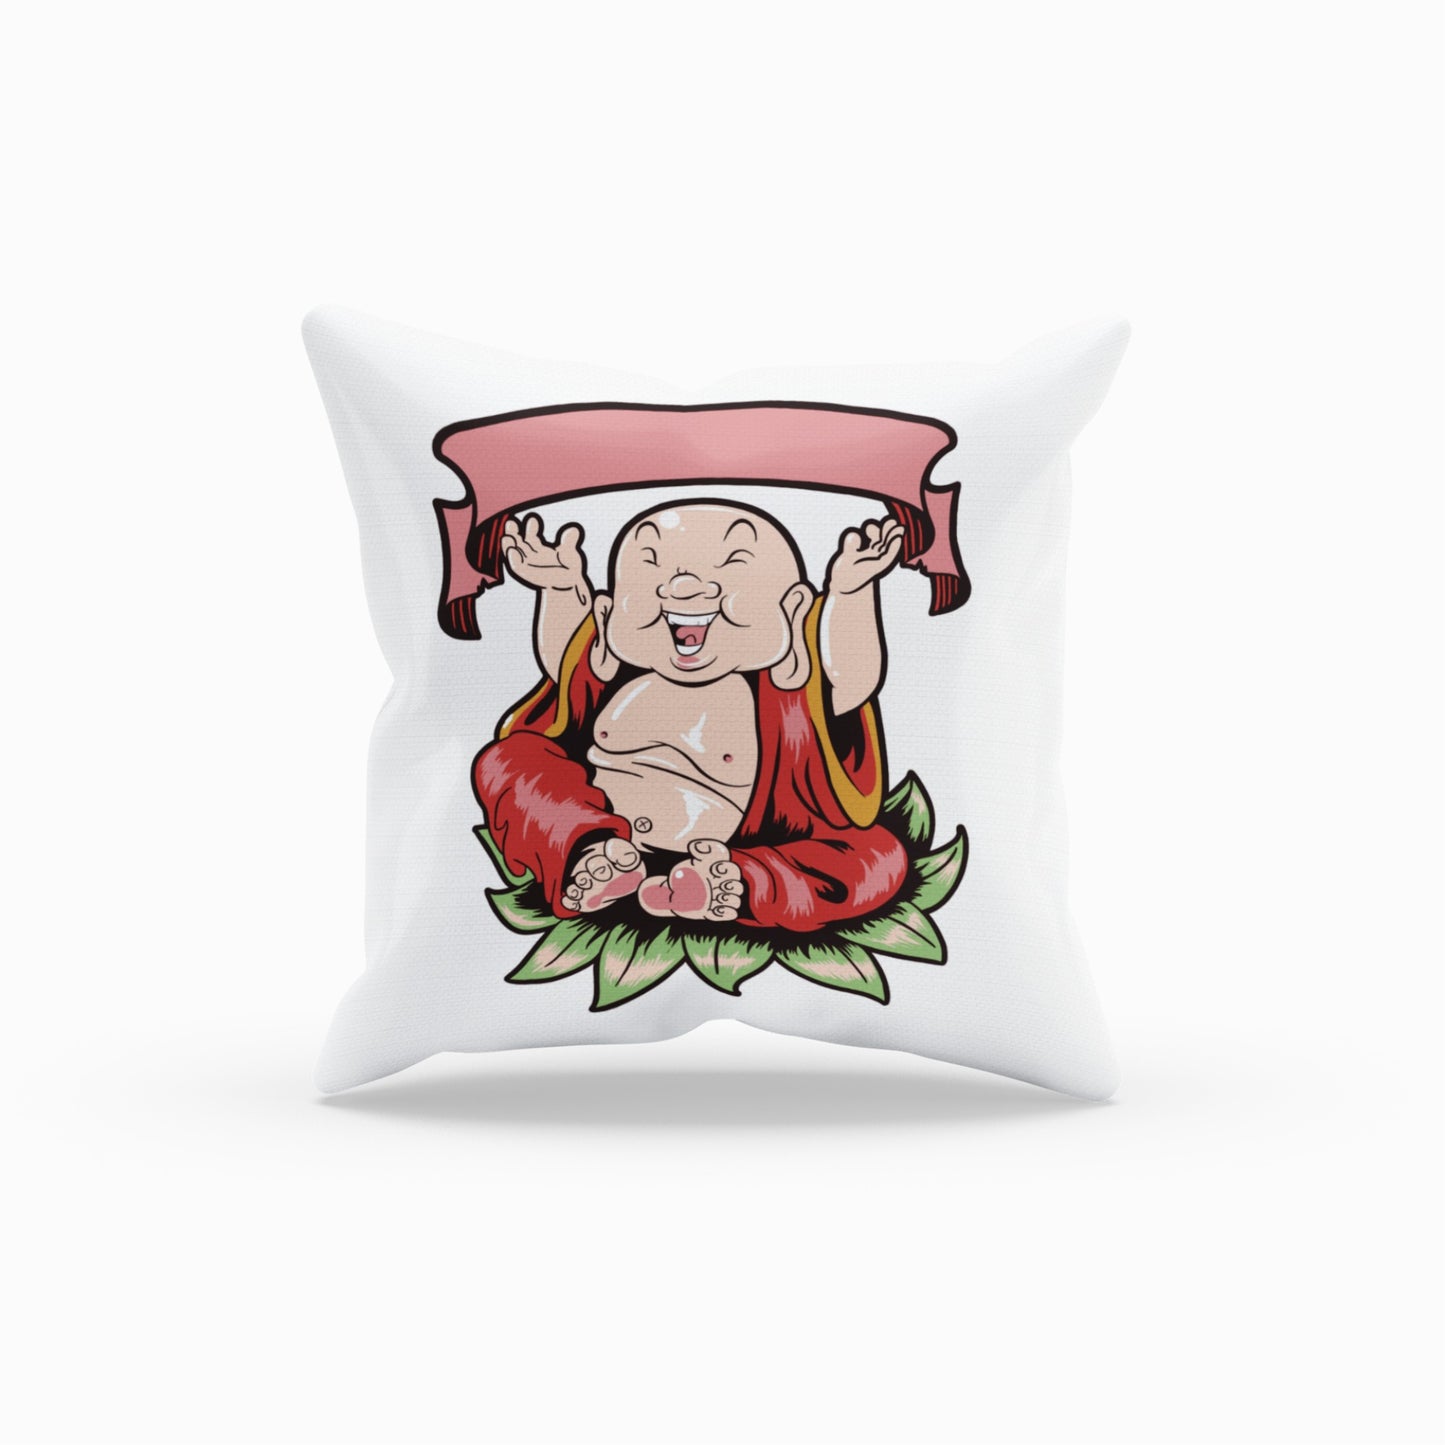 Delightful Buddha Accent Pillow with Humor